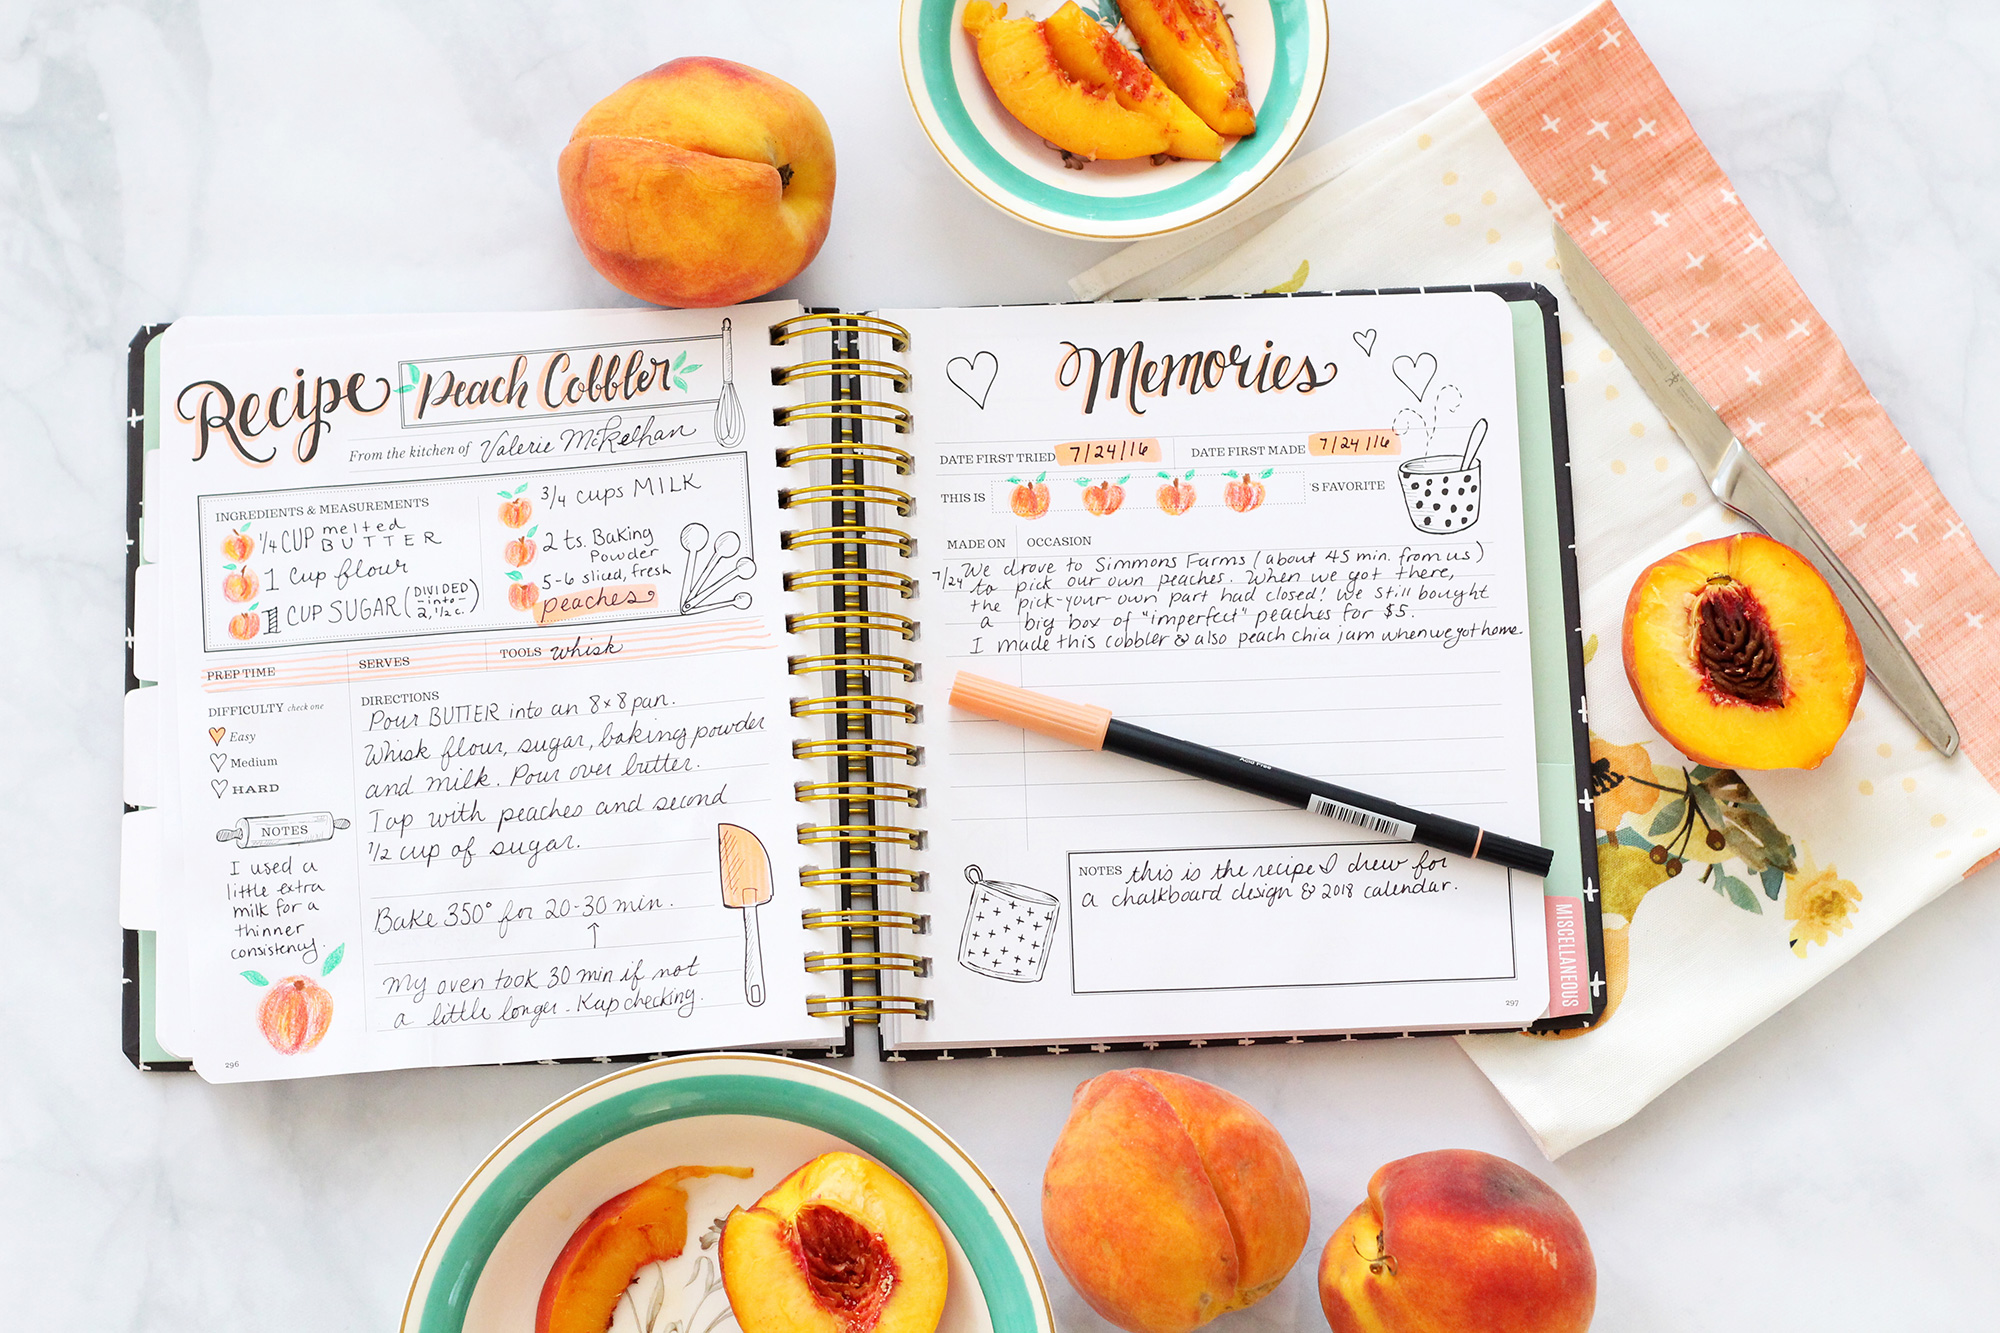 Get crafty with your Keepsake Kitchen Diary by adding personal touches to the recipe! Brush pens and colored pencils are great ways to make your recipe and memory spreads more personal.